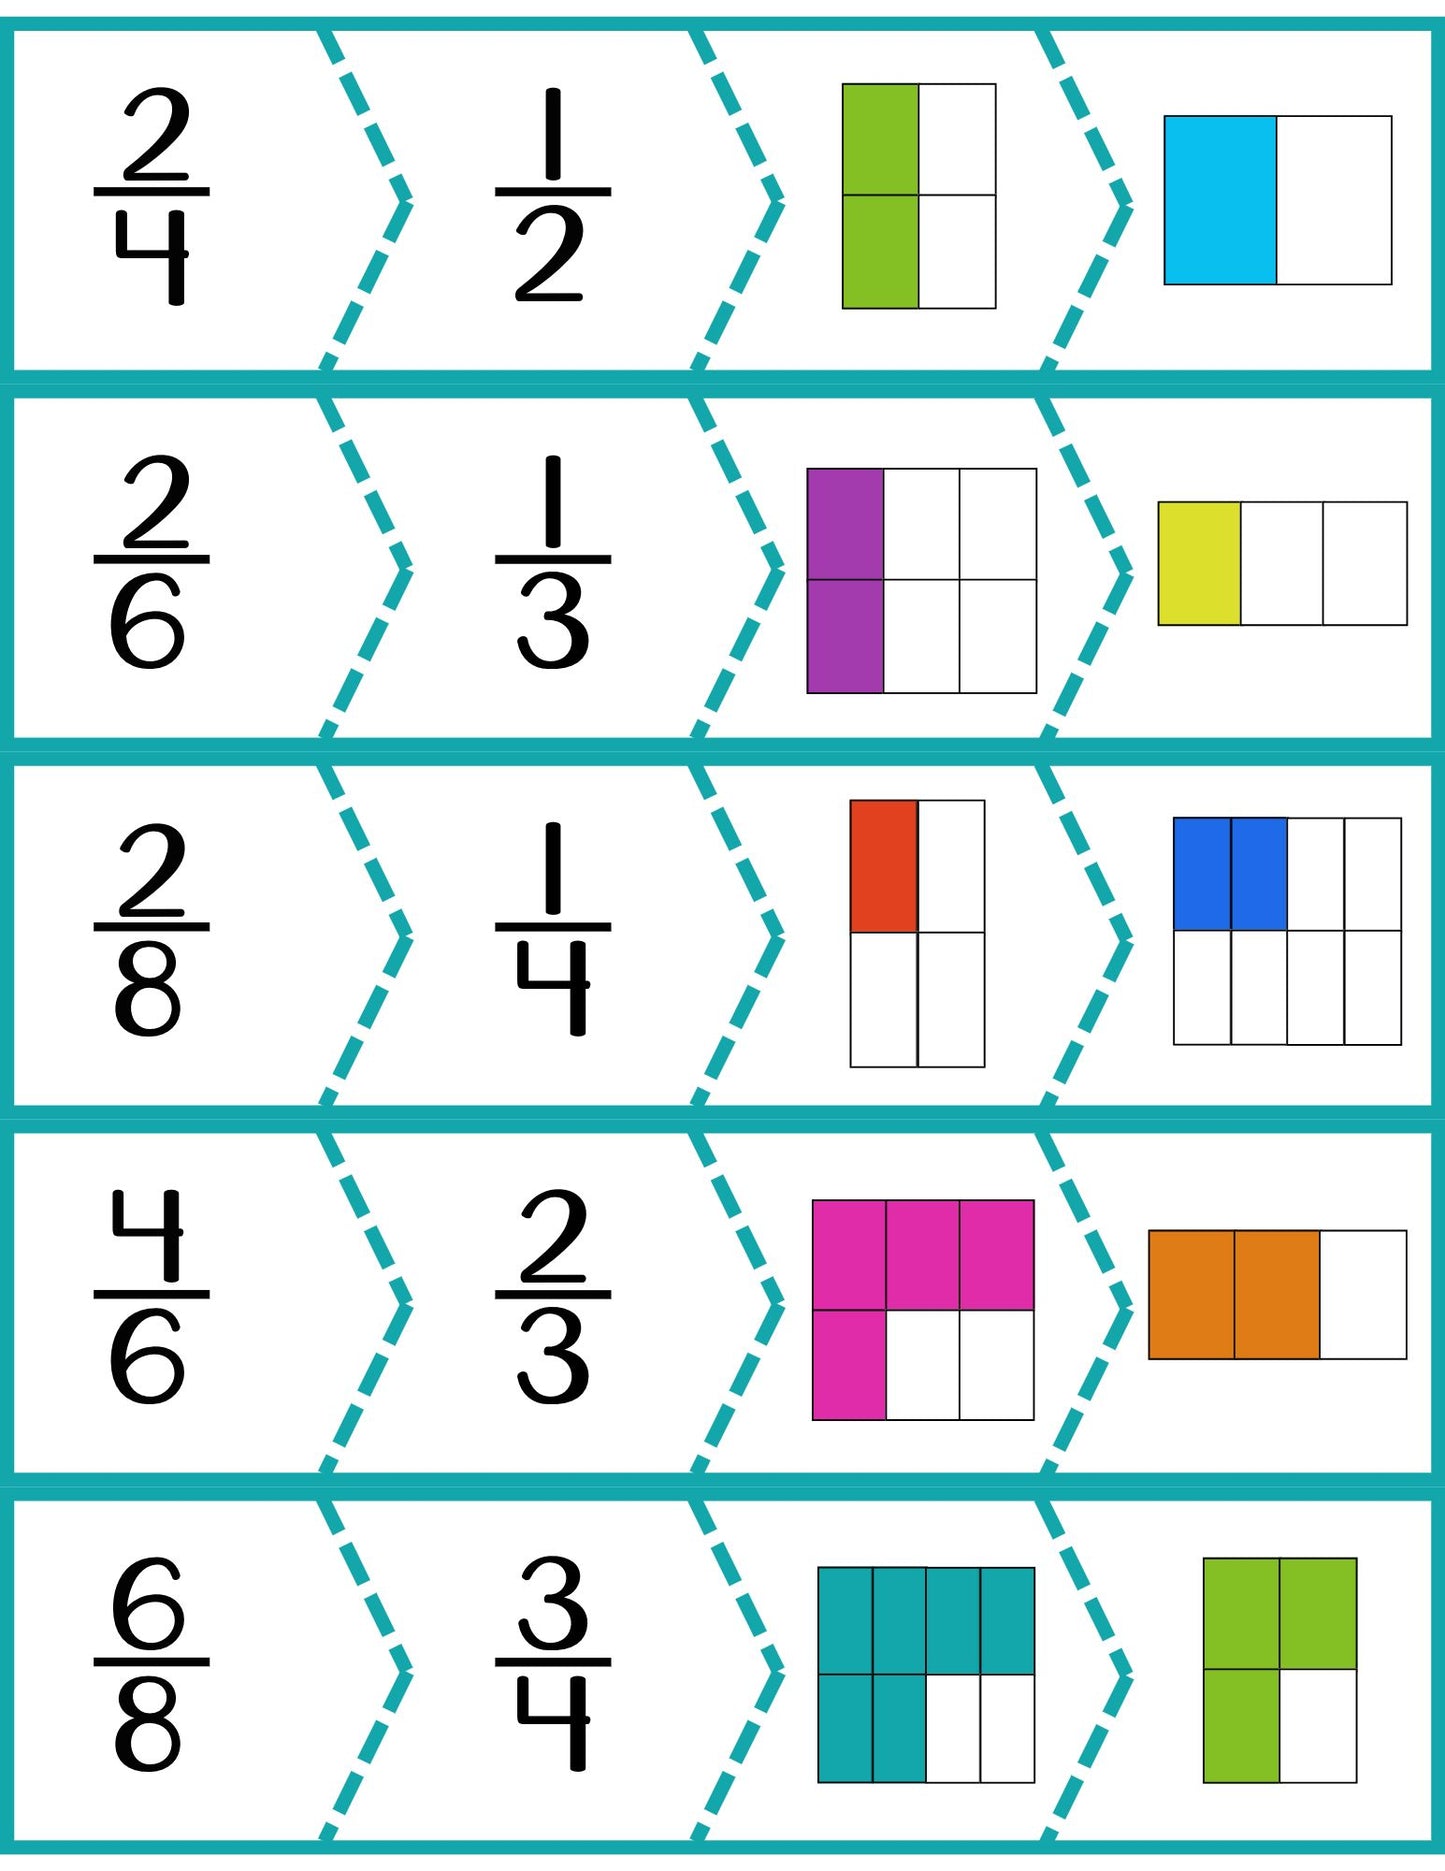 Reducing Fractions 4-Part Puzzles